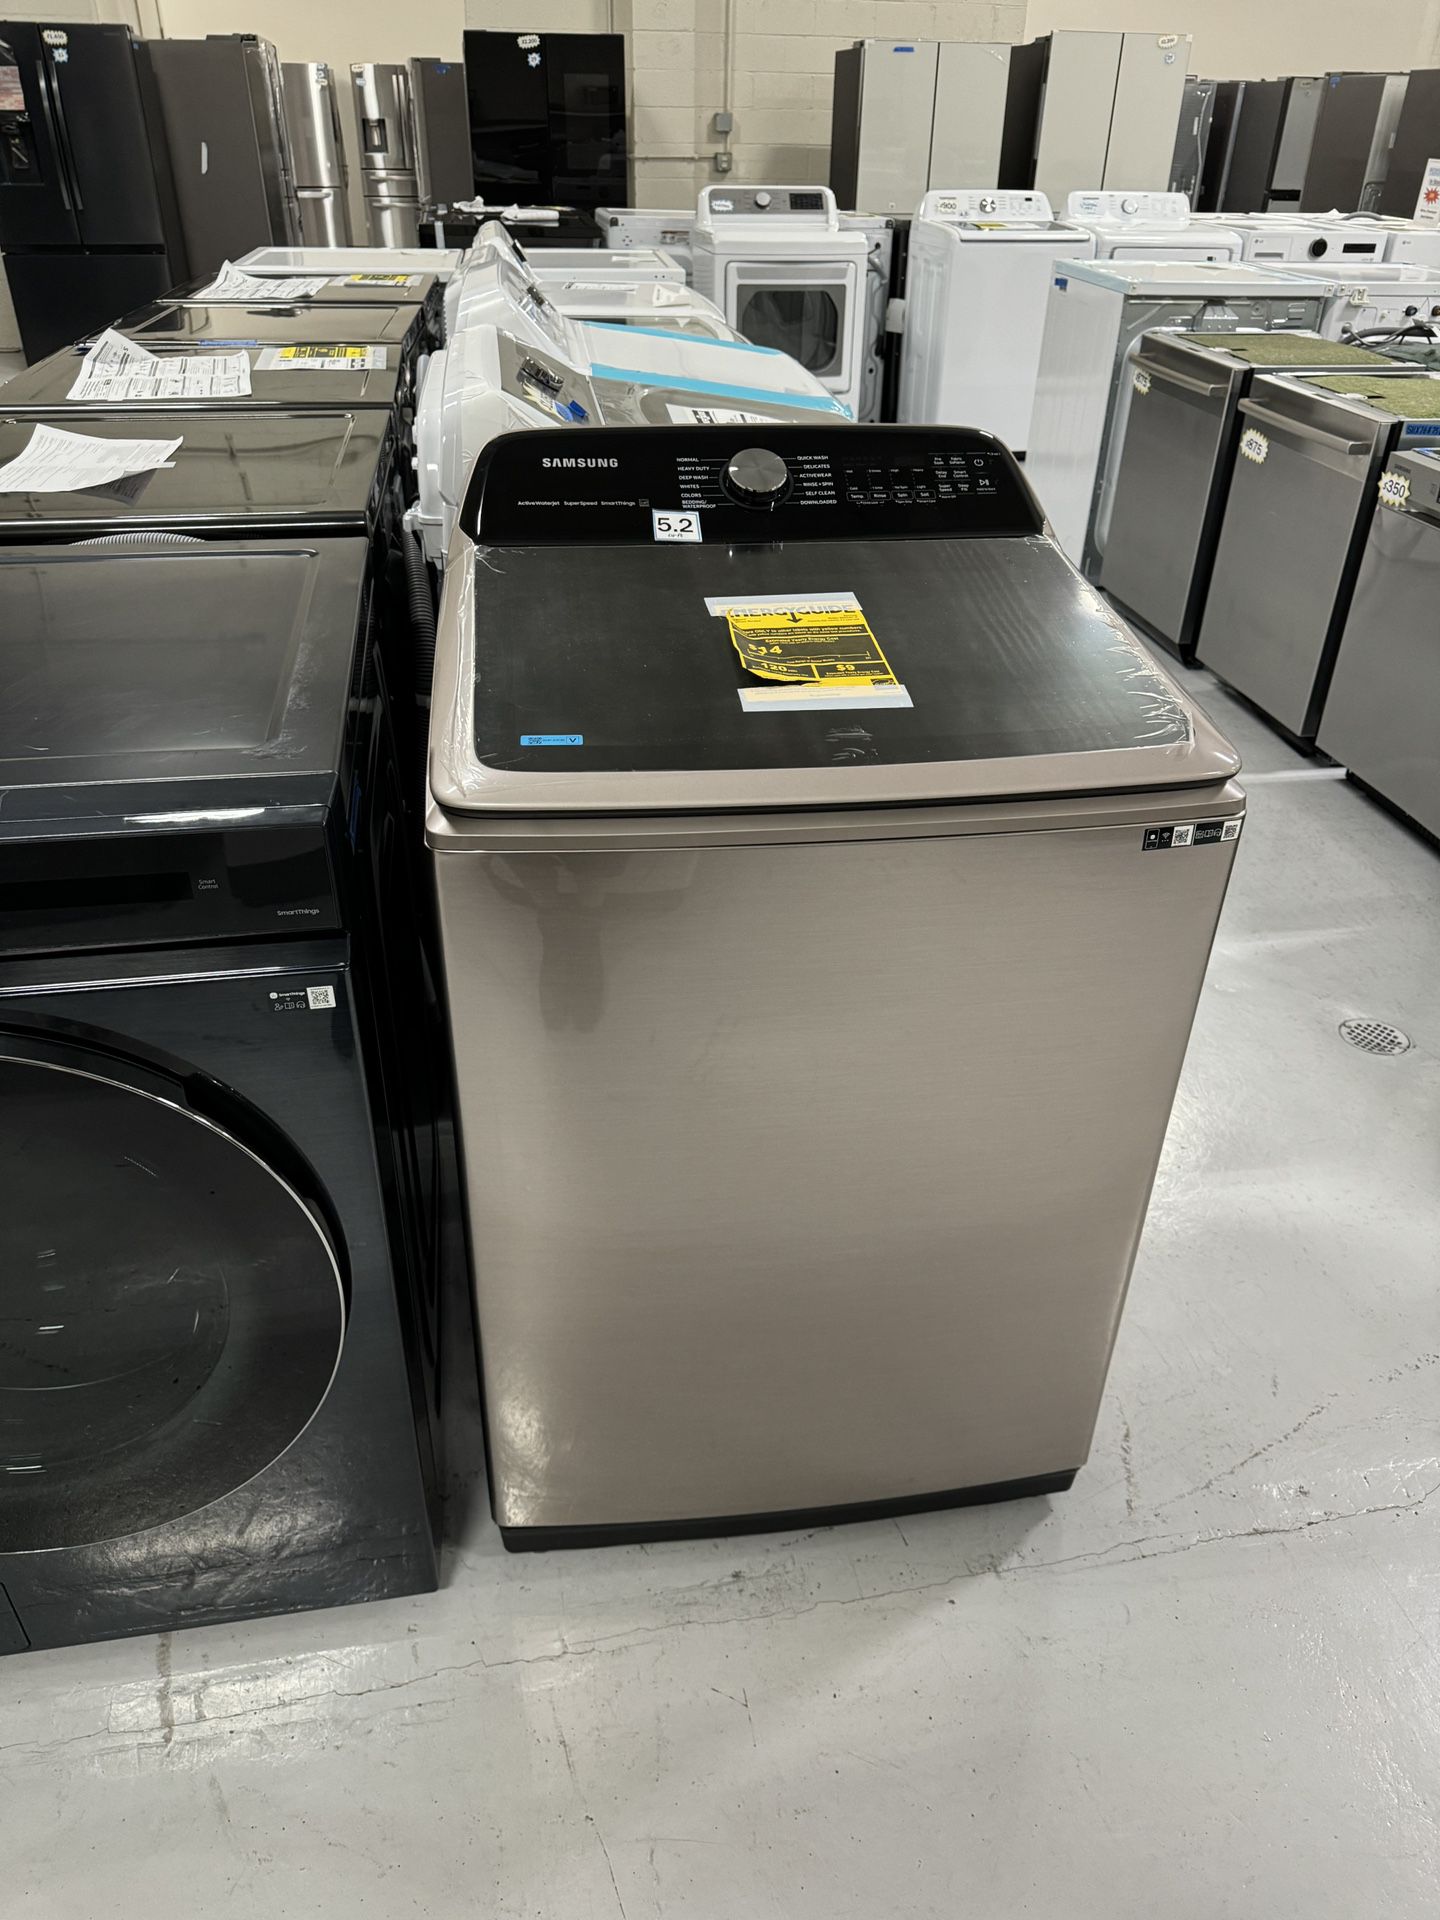 XL Washer New Top Load Champagne Rose Gold 